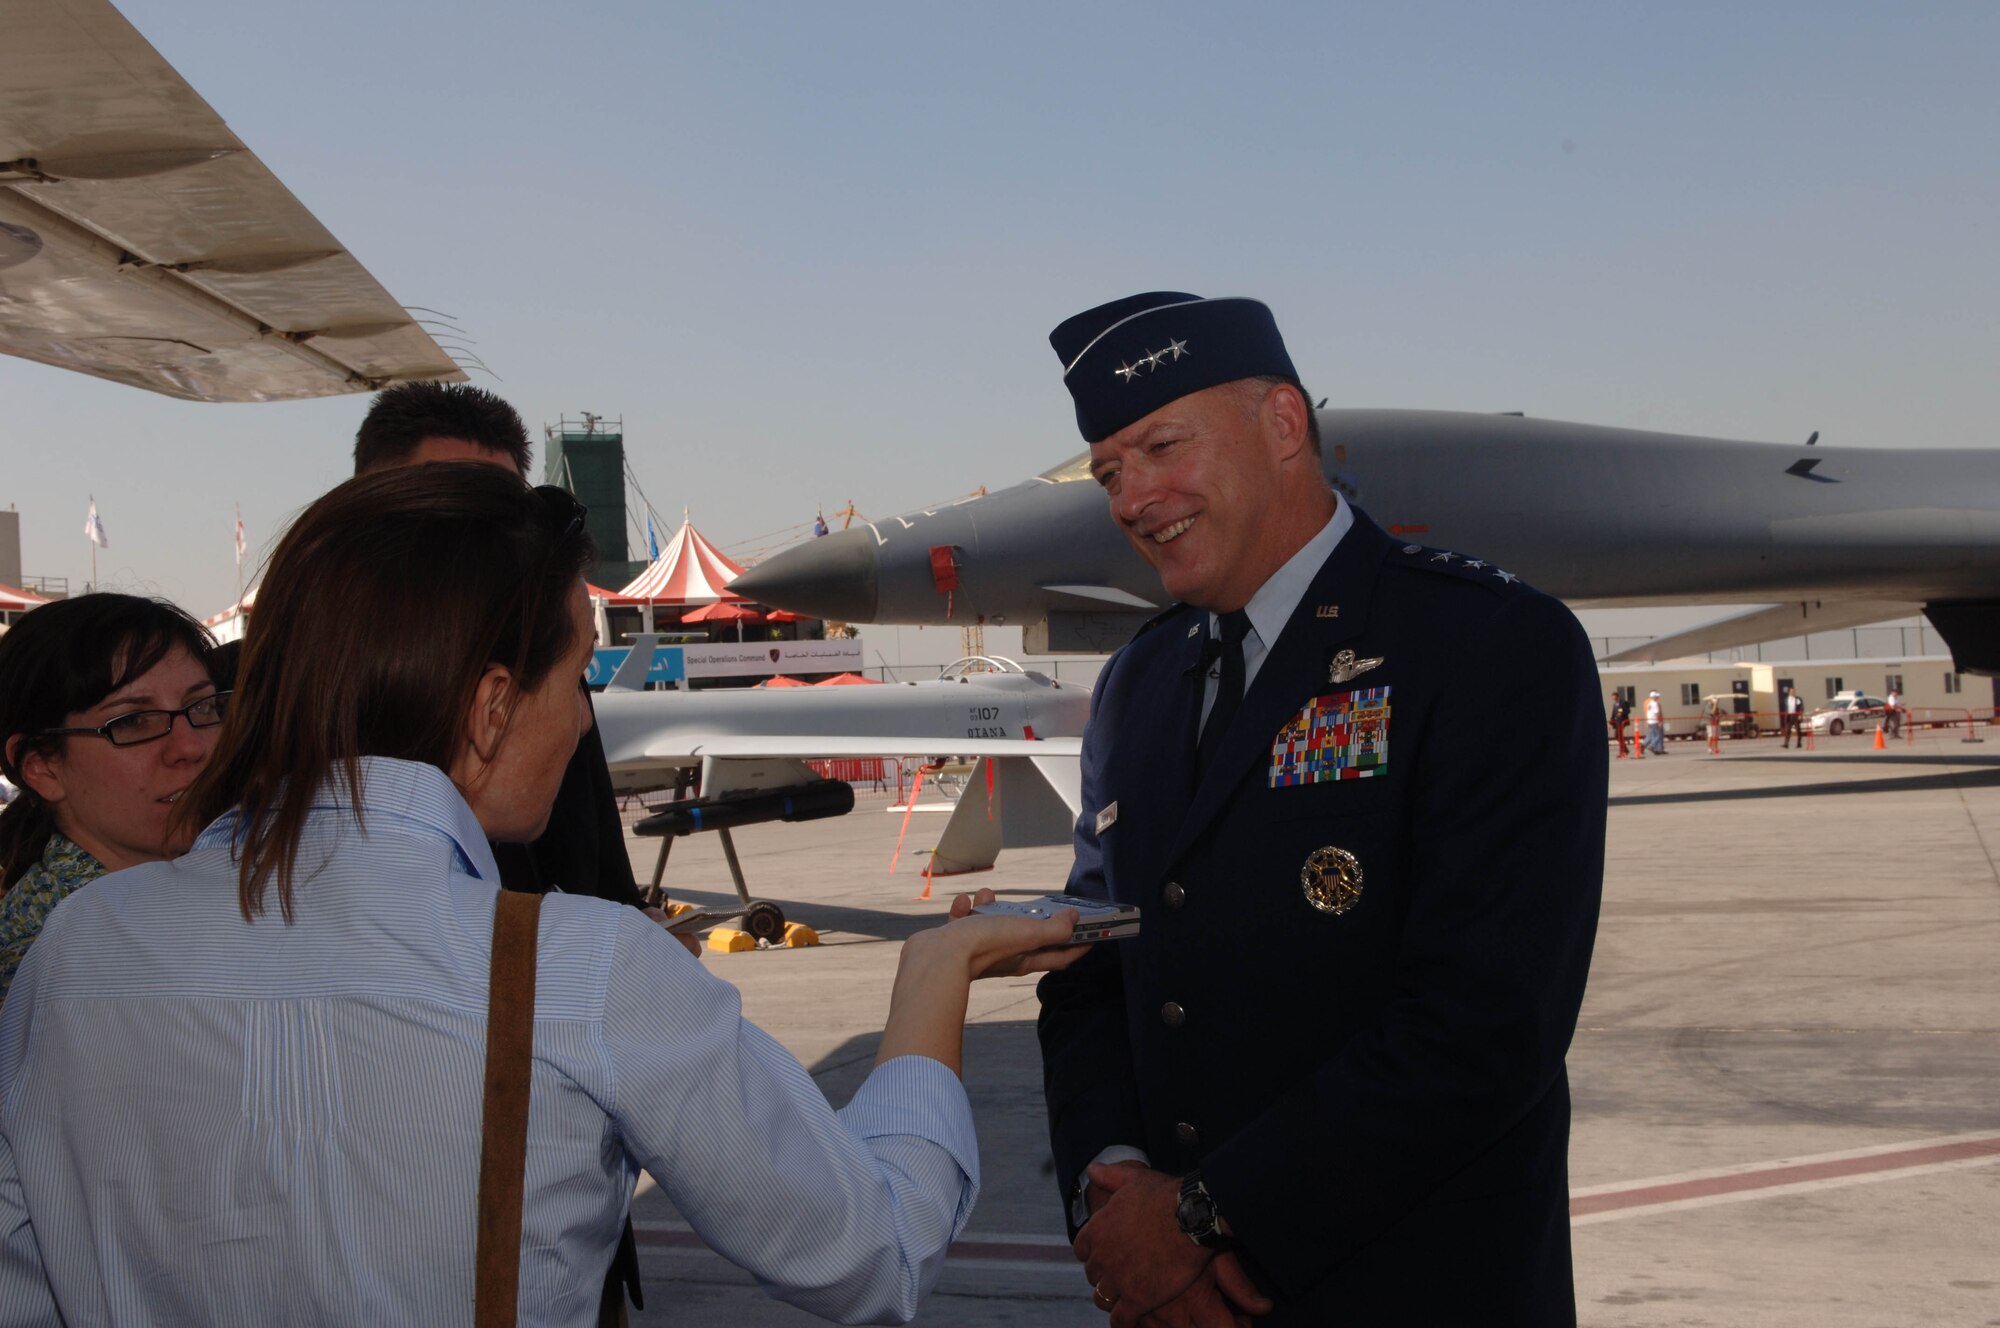 Lieutenant General Gary North, commander 9th Air Force and U.S. Central Command Air Forces, conducts an interview during the Dubai Air Show Nov. 12, 2007.  The United States military is providing of support for the 10th Edition of the Dubai Air Show from November 11-15, 2007.  Approximately 250 military members and a variety of U. S. Air Force and Navy aircraft will exhibit a snapshot of the U.S. military's diverse aircraft inventory. The United States military is a long-standing participant in the biennial Dubai Air Show.  (Air Force Photo by Tech. Sgt. Charlein C. Sheets)